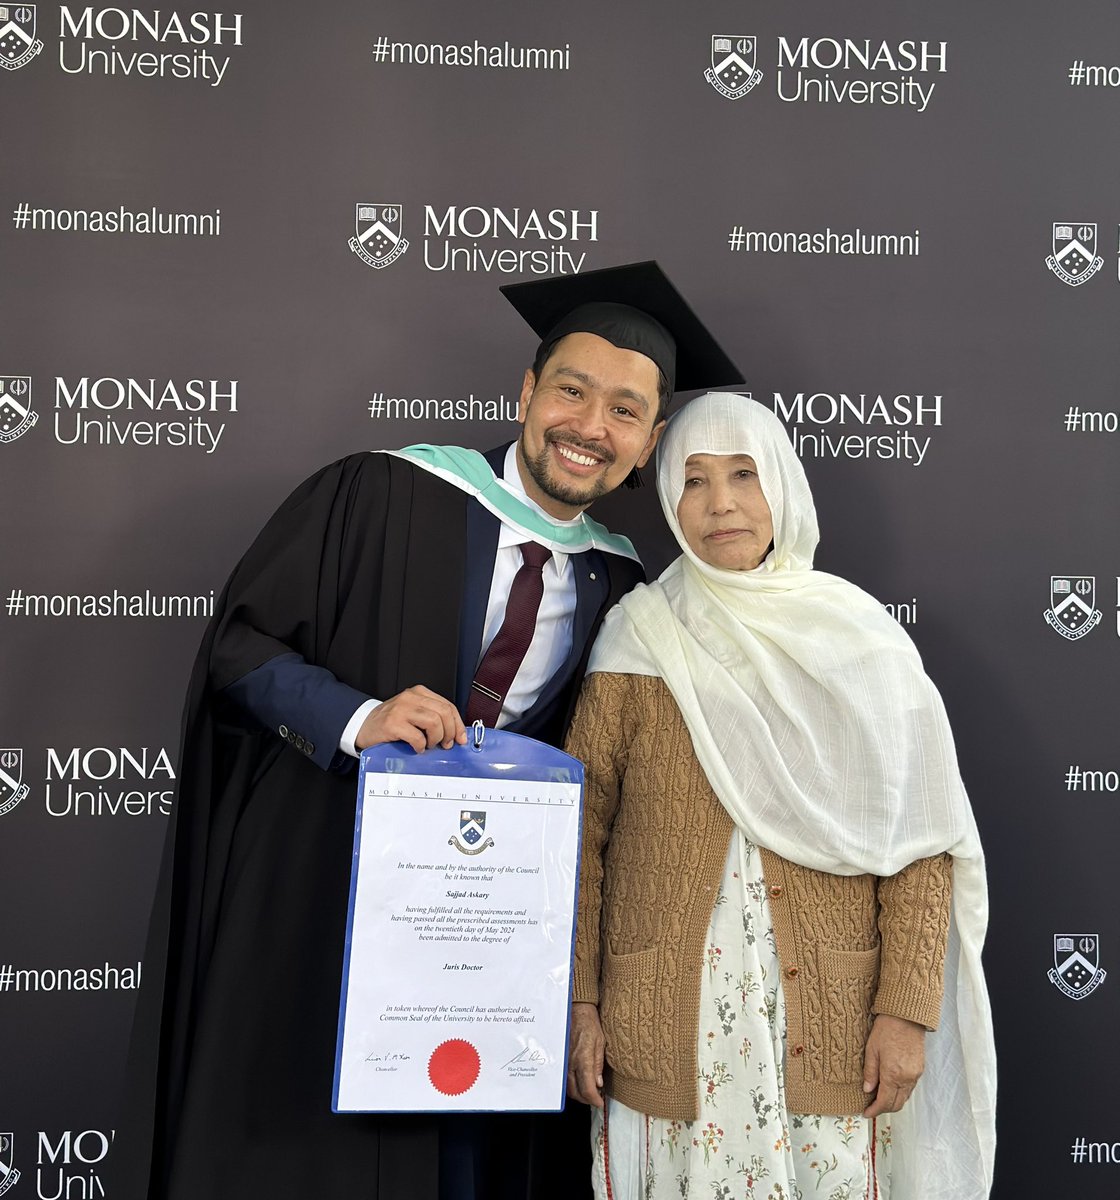 I did it, Mom. I graduated with a Juris Doctor and a Bachelor's in International Relations, becoming a proud Australian lawyer. From a refugee child to this moment, my mom's hope guided me. I achieved this & brought my mom to safety in Australia to witness my graduation❤️